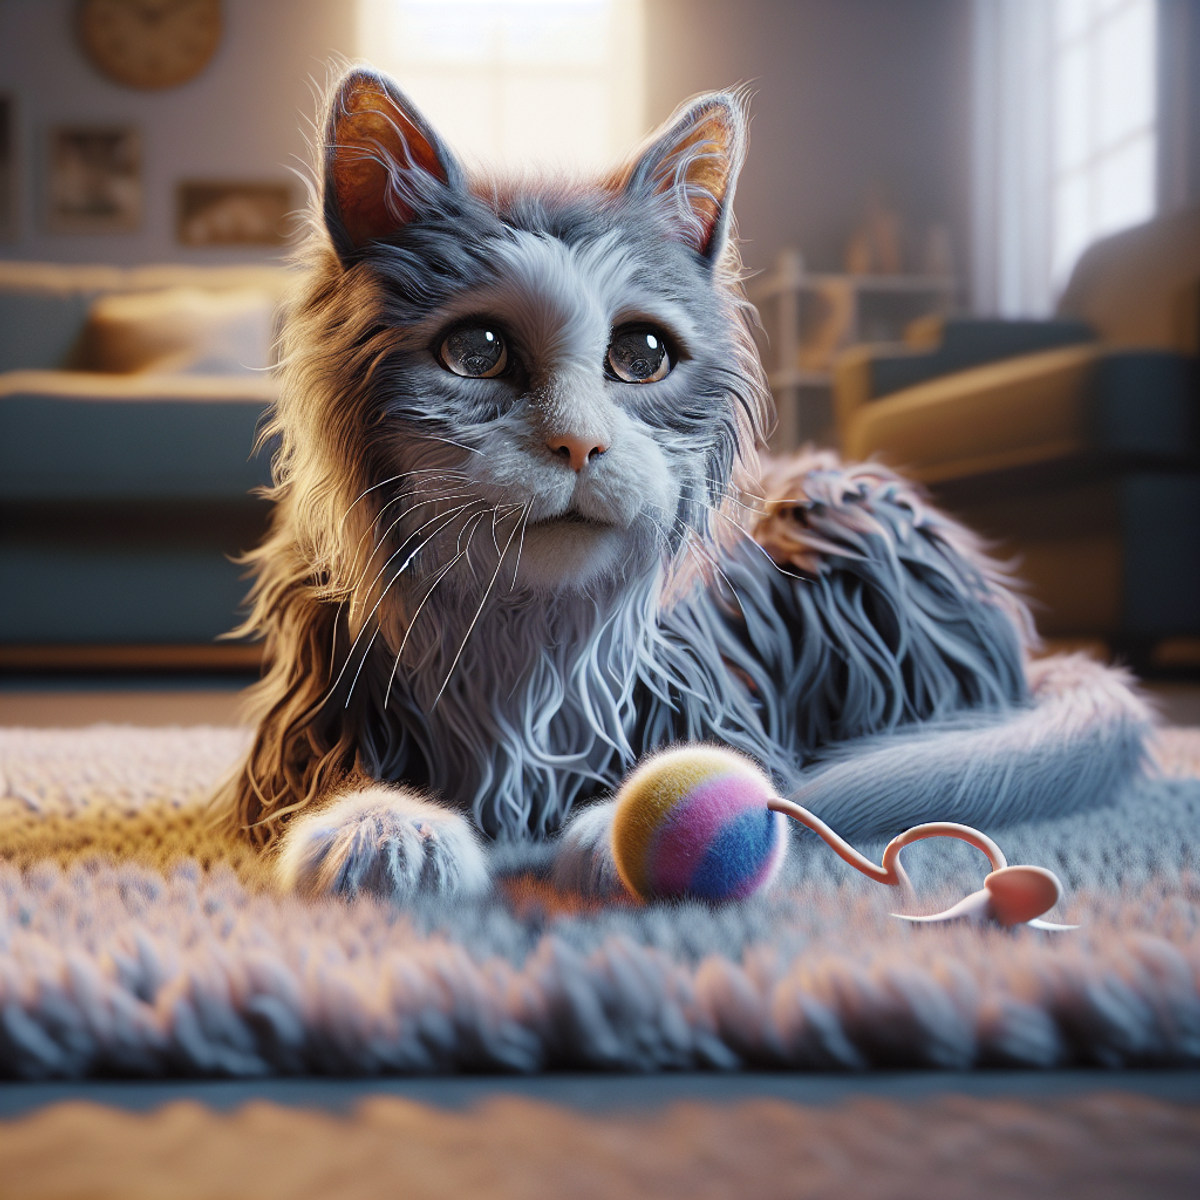 An elderly cat with grey and white fur playfully swatting at a colorful ball with feathers, eyes sparkling with joy.